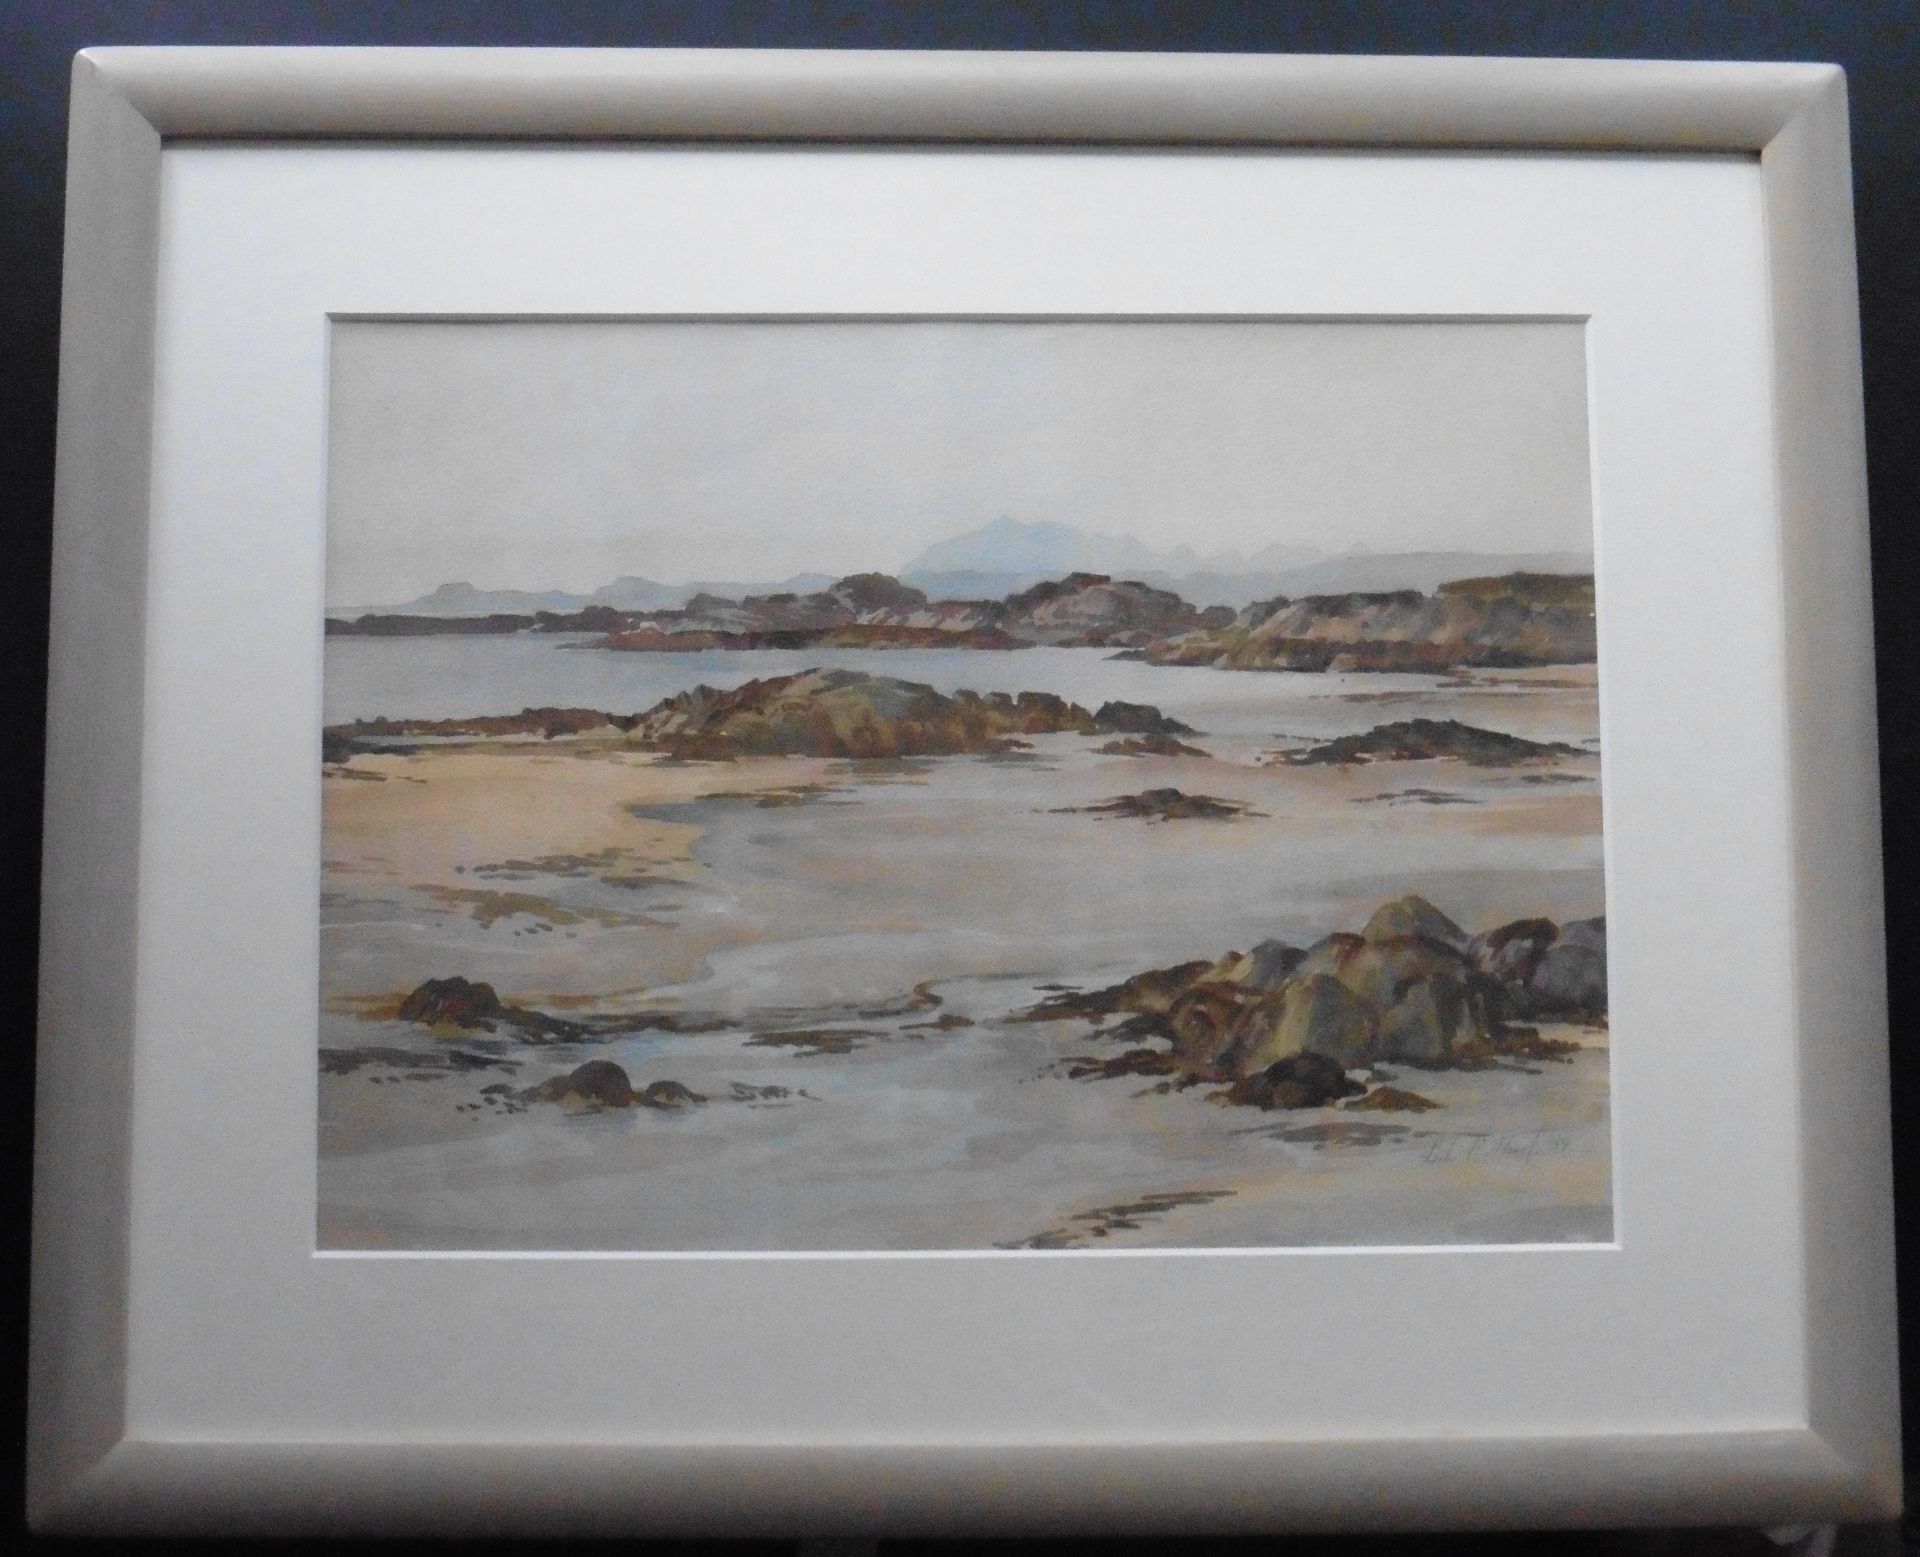 Original signed watercolour by leslie P stewart Fl 1946-1967 - Scottish View Skye from Traig Sands - Image 2 of 5